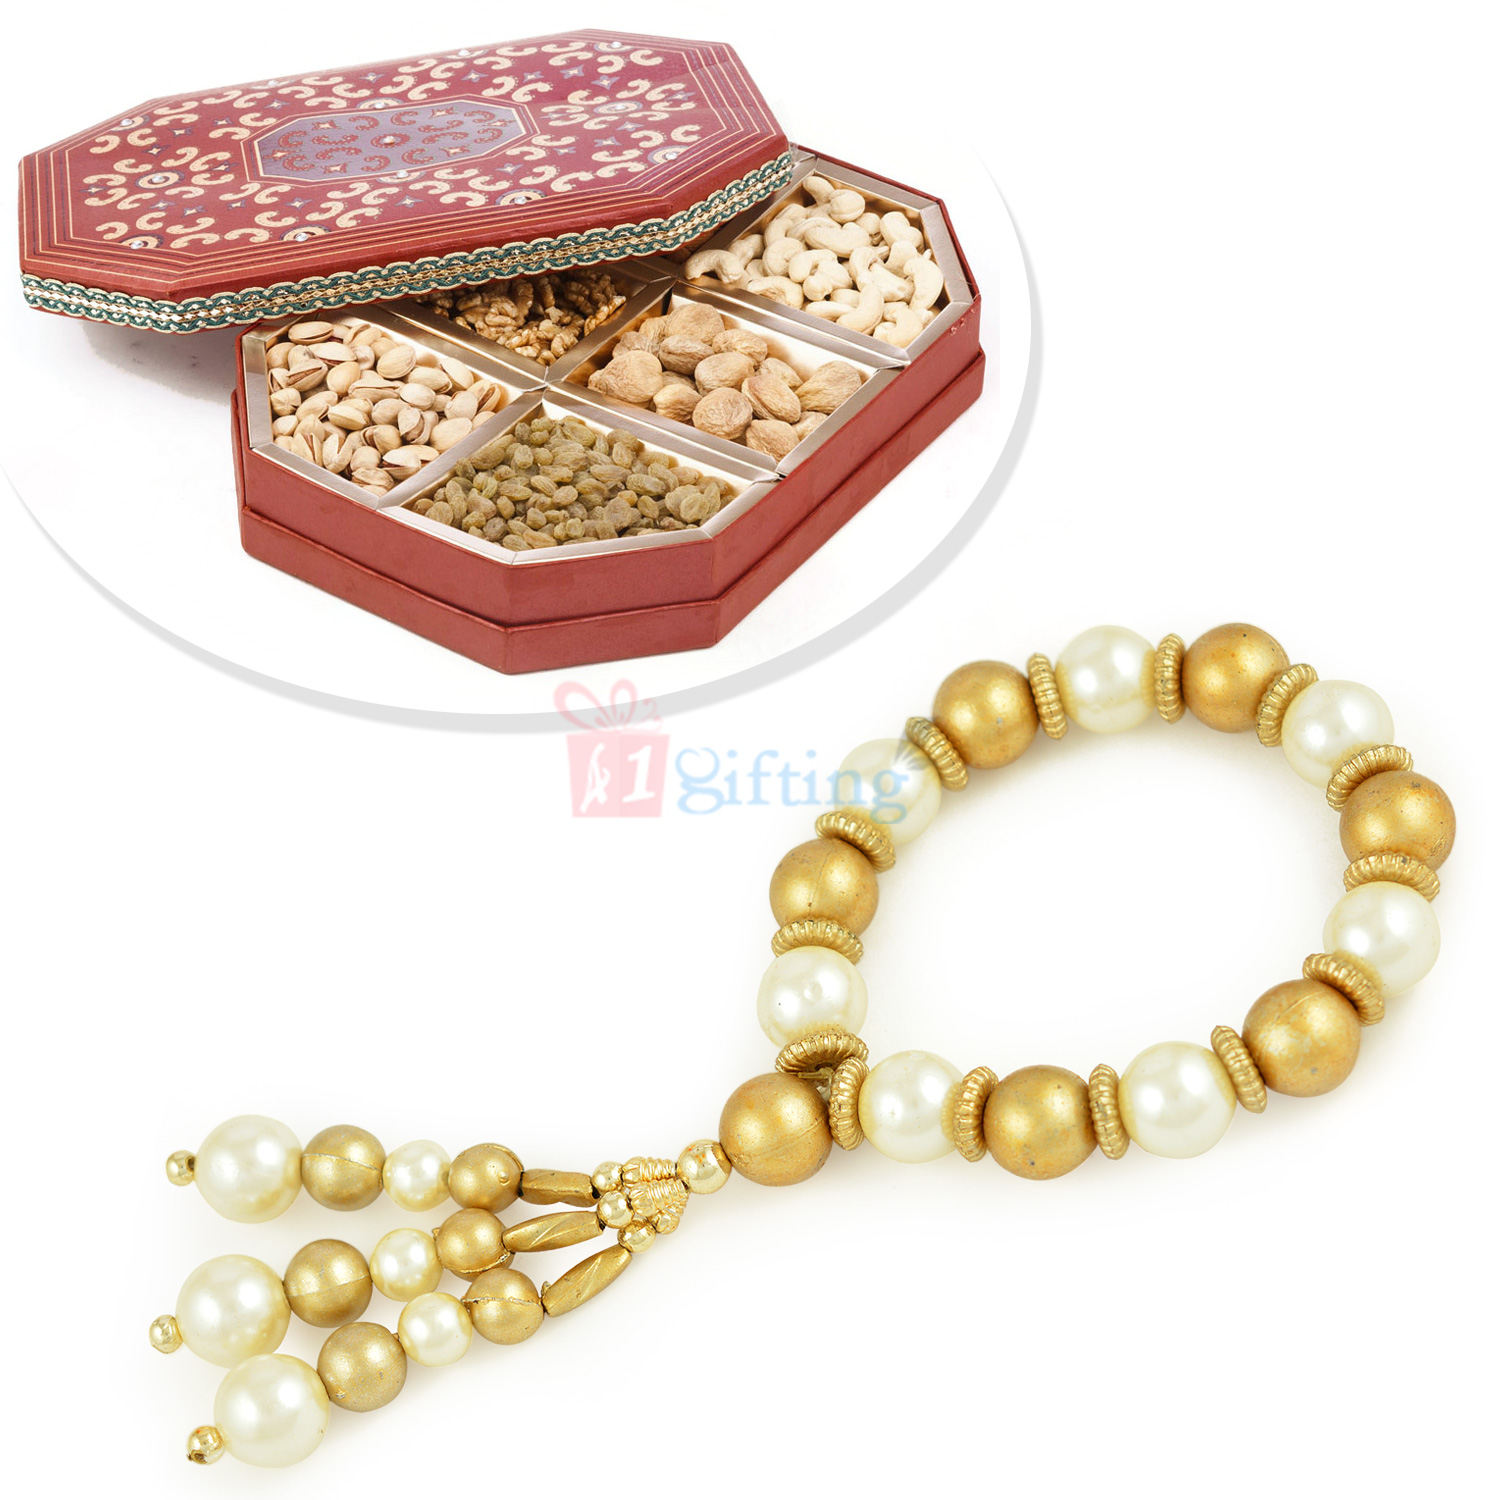 Beautiful Pearl and Beads Ladies Bracelet with 6 Types Nuts Dryfruits